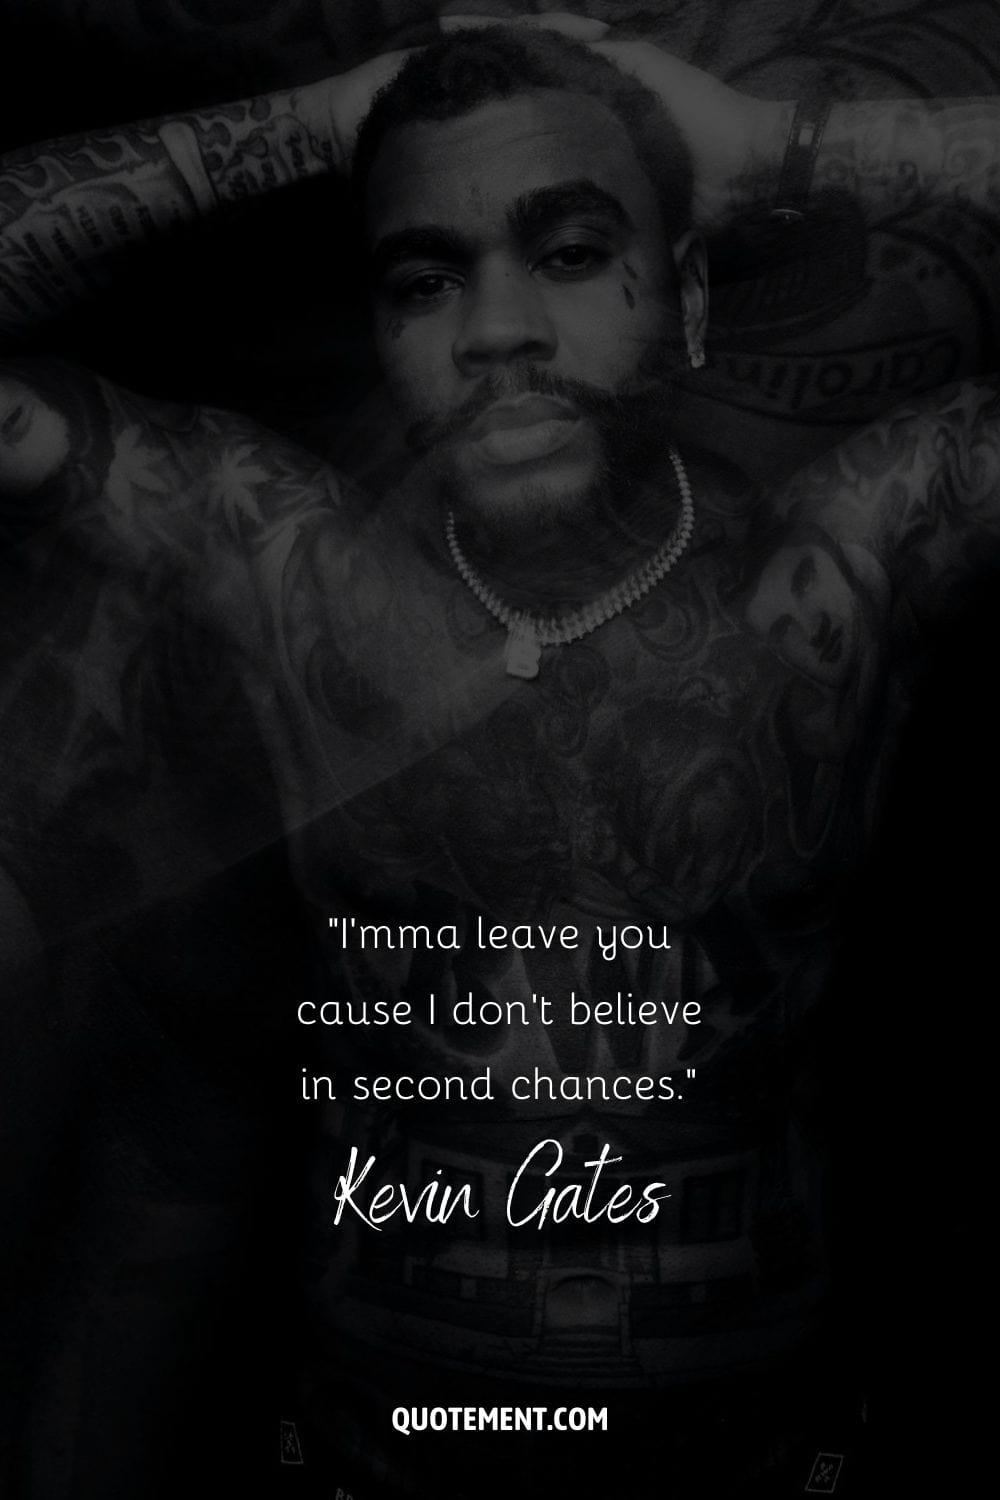 “I'mma leave you cause I don't believe in second chances.” – Kevin Gates